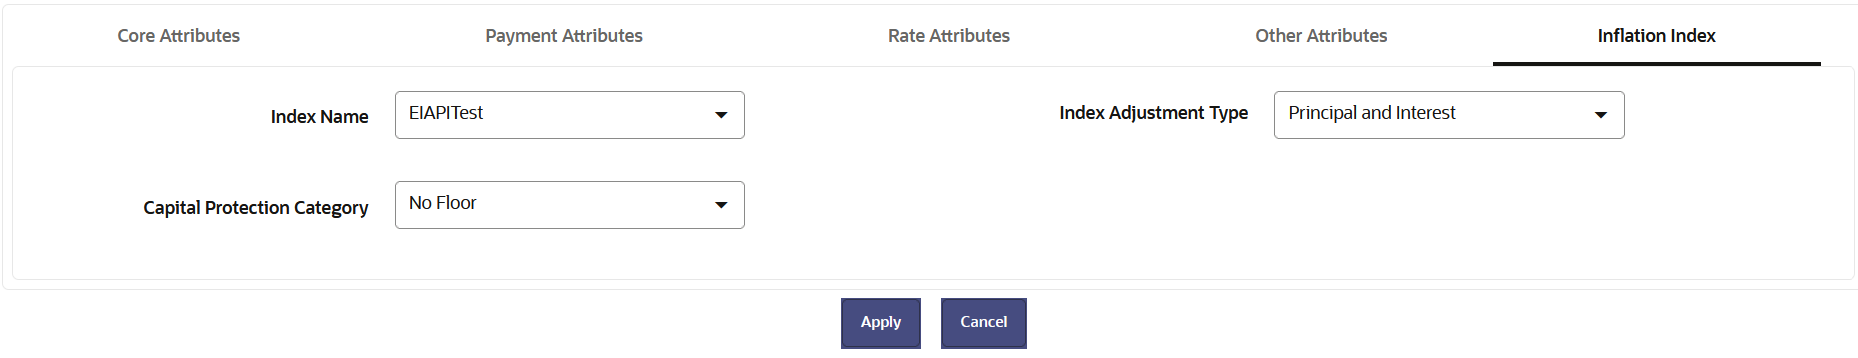 Inflation Adjustment Attributes tab to define the Product Characteristic Rule